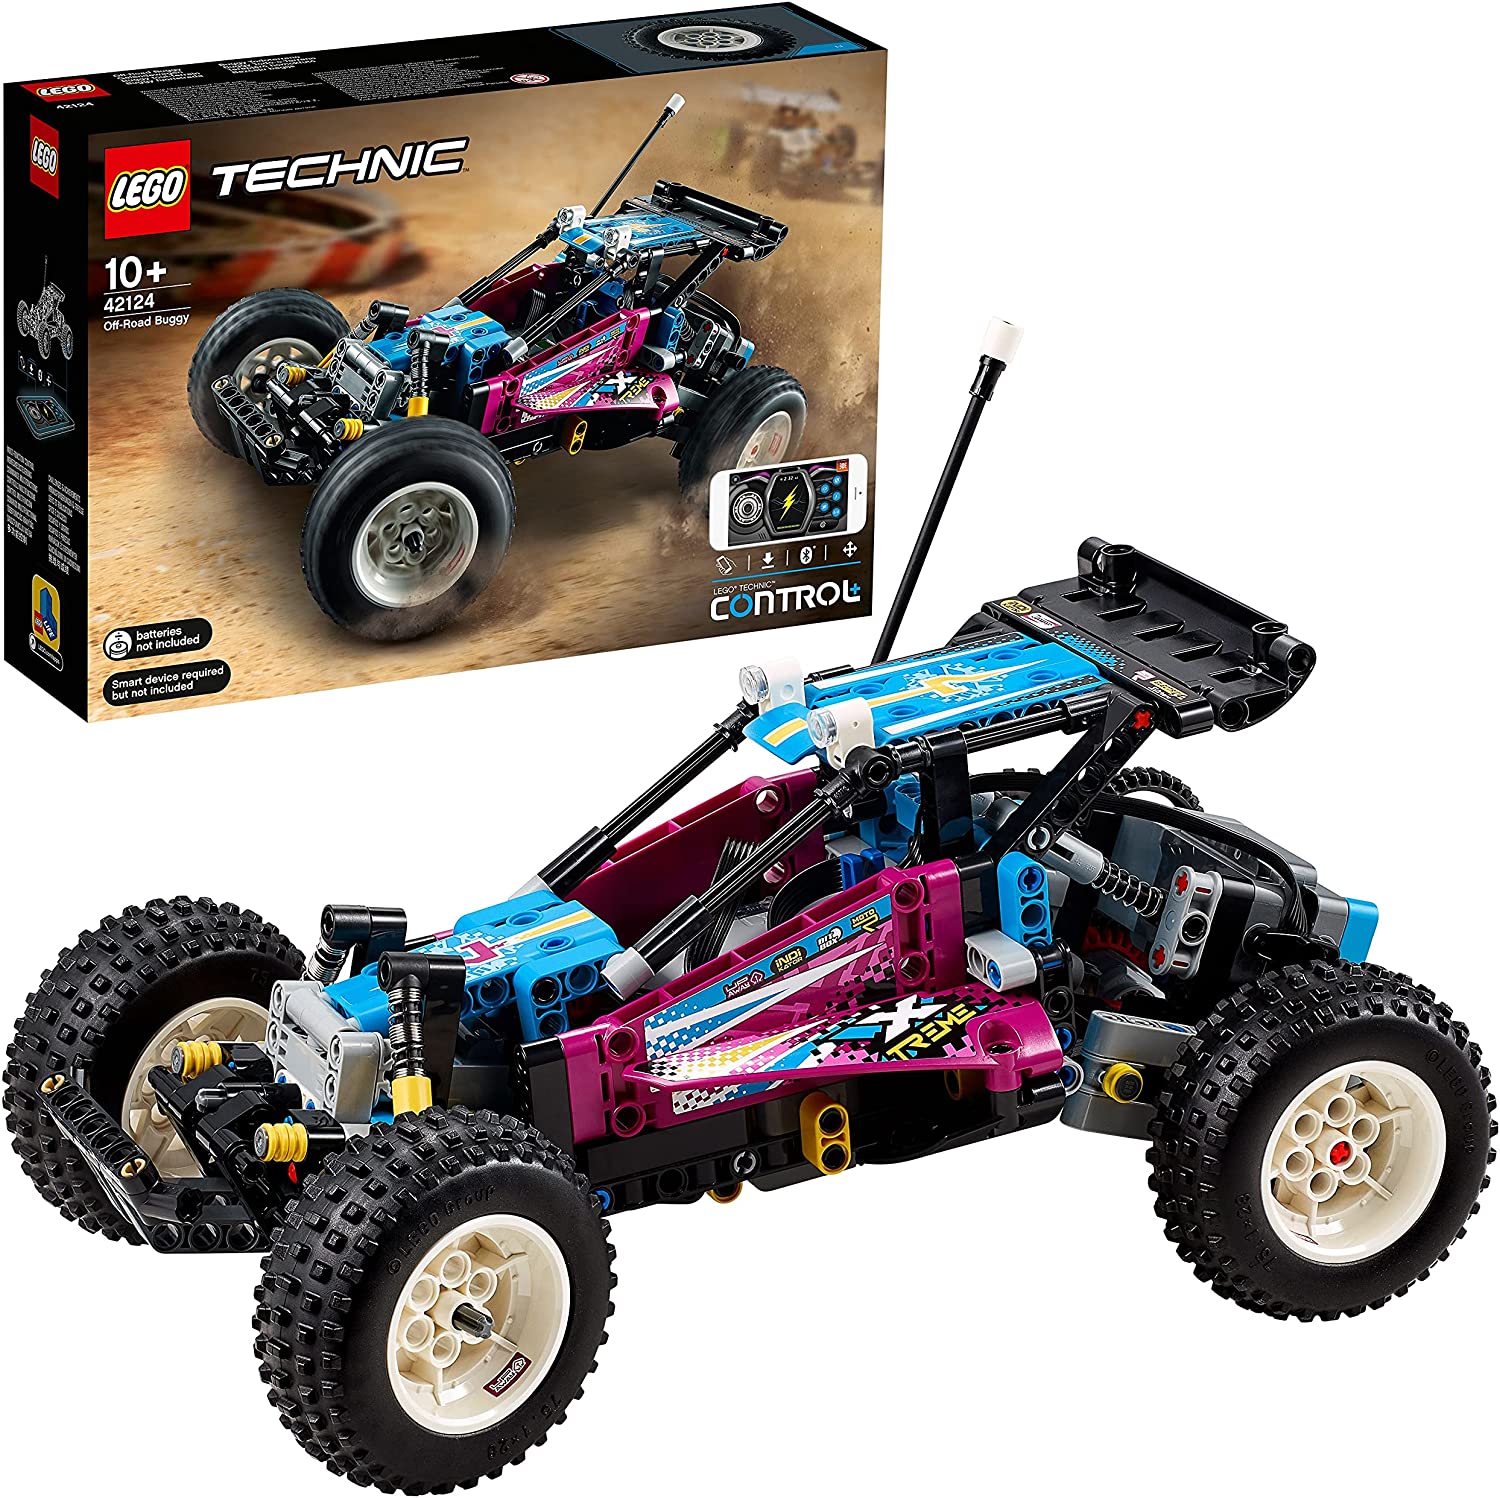 LEGO 42124 Technic Off-Road Buggy CONTROL+ App-Controlled Retro RC Car Toy for Kids